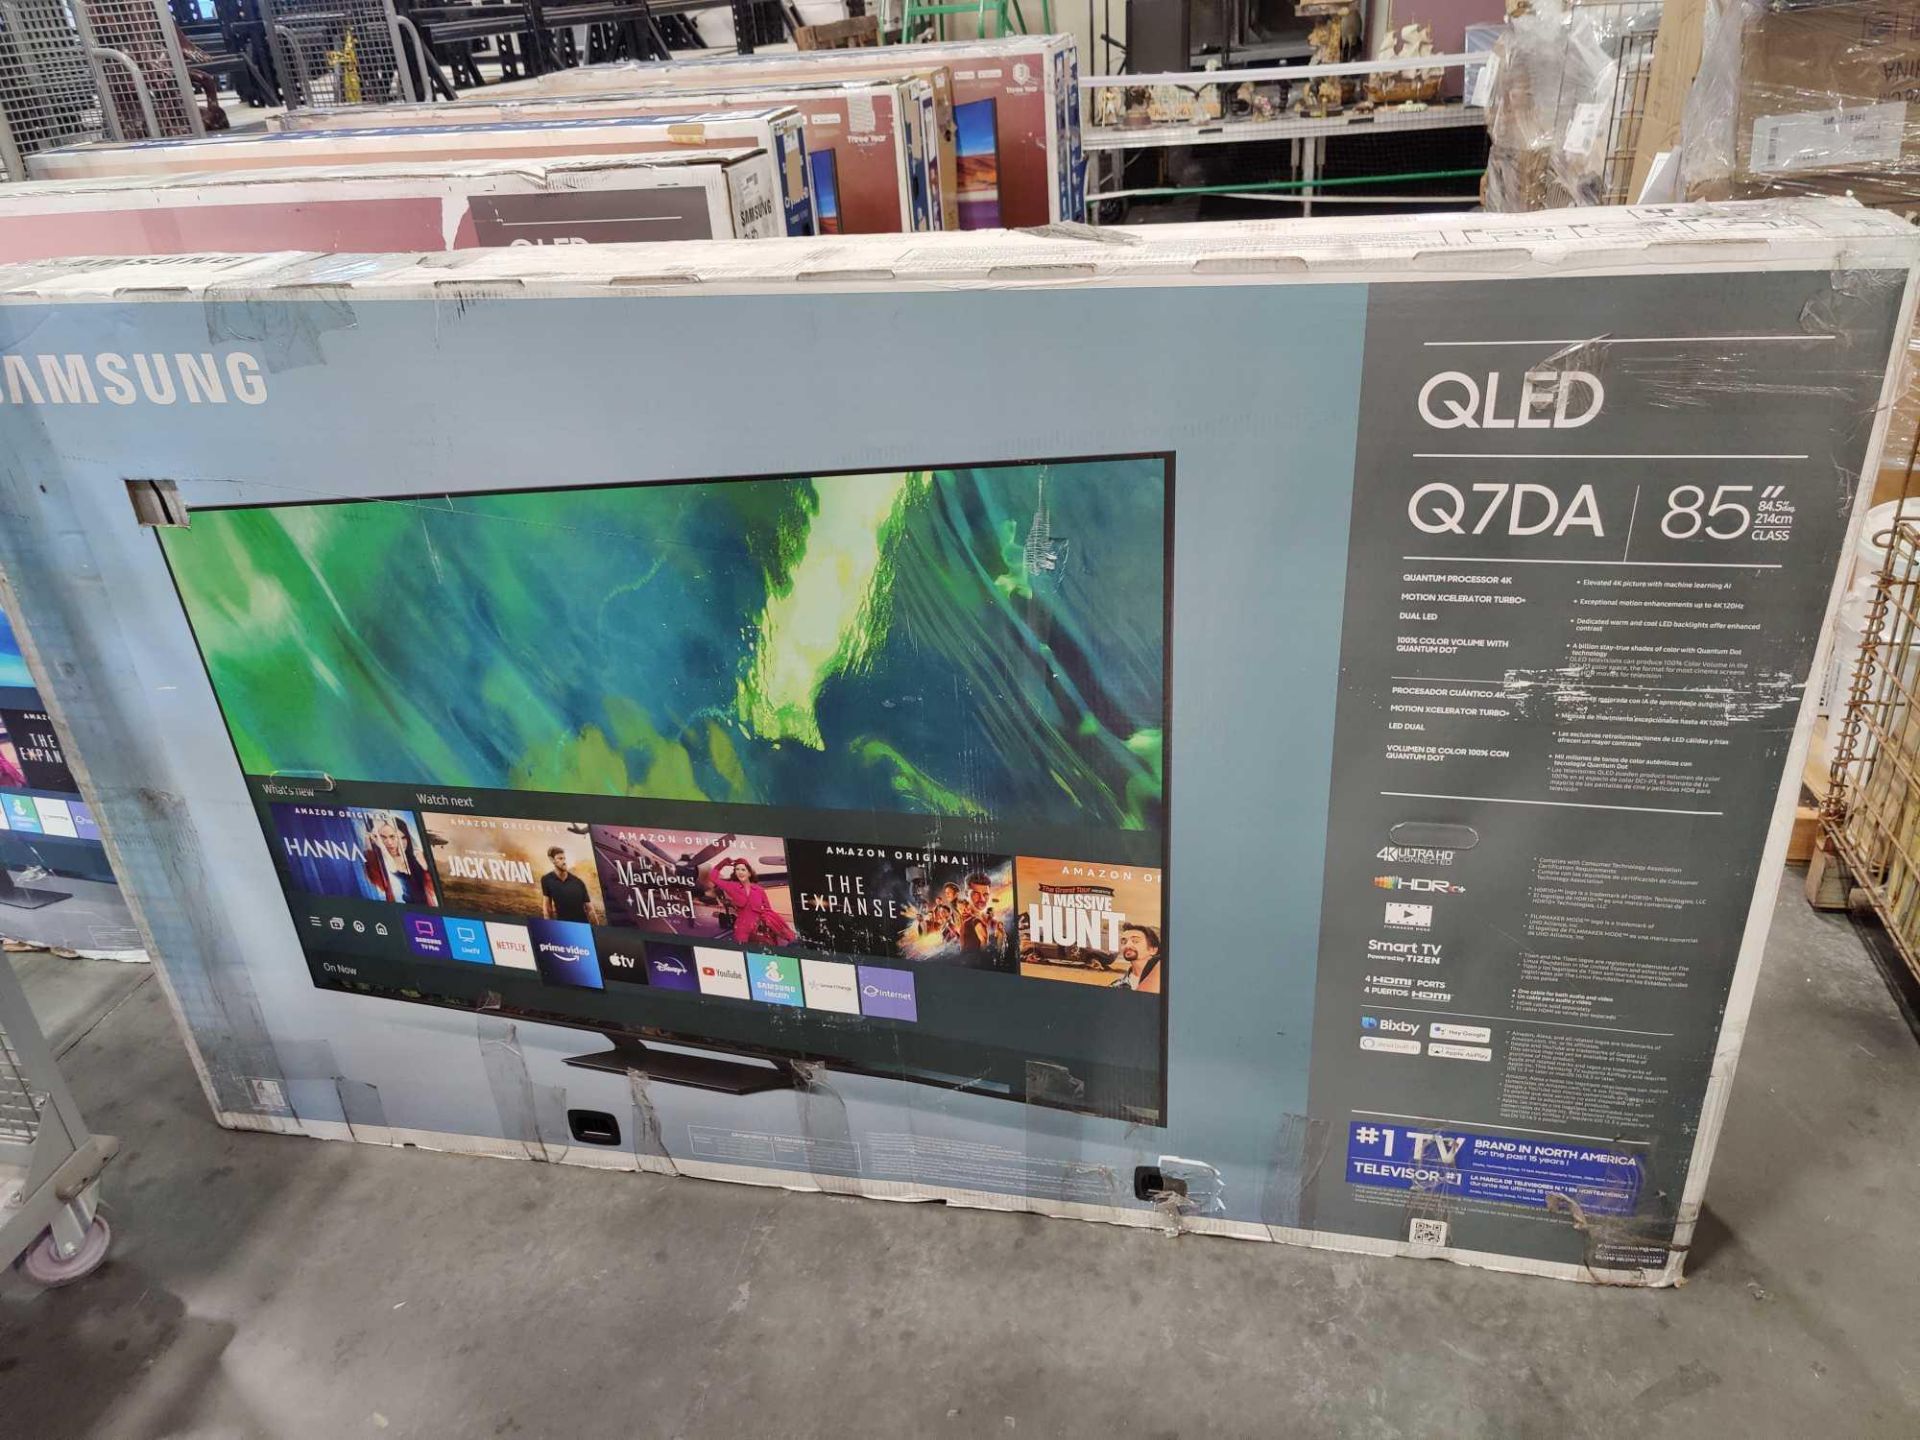 Samsung QLED Q7DA 85" (Section of TV's located near the stage) - Image 3 of 3